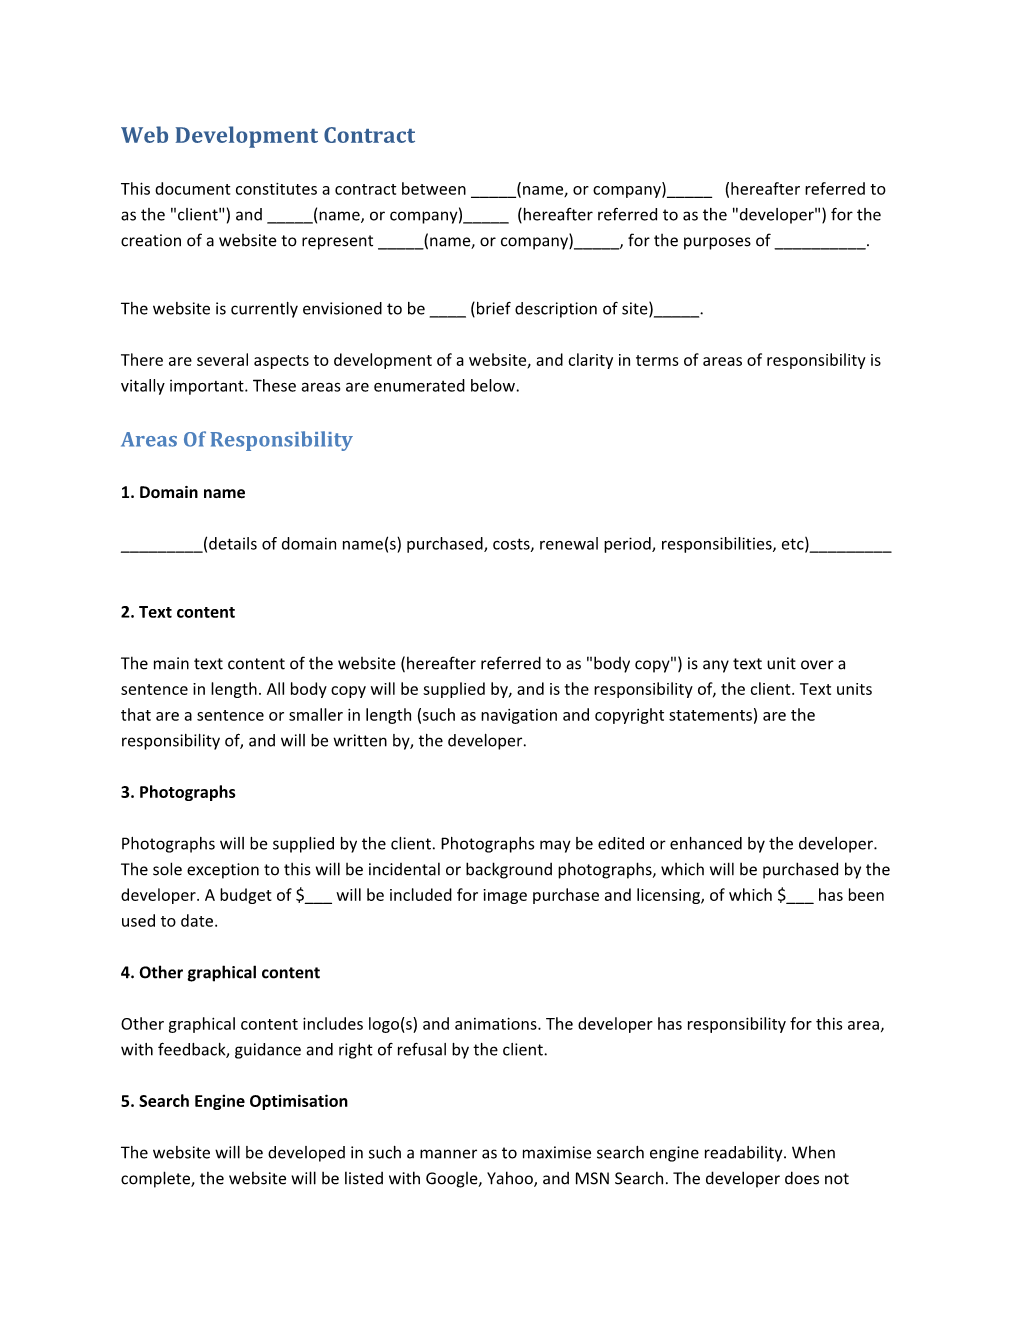 Web Development Contract This Document Constitutes a Contract Between _____(Name, Or